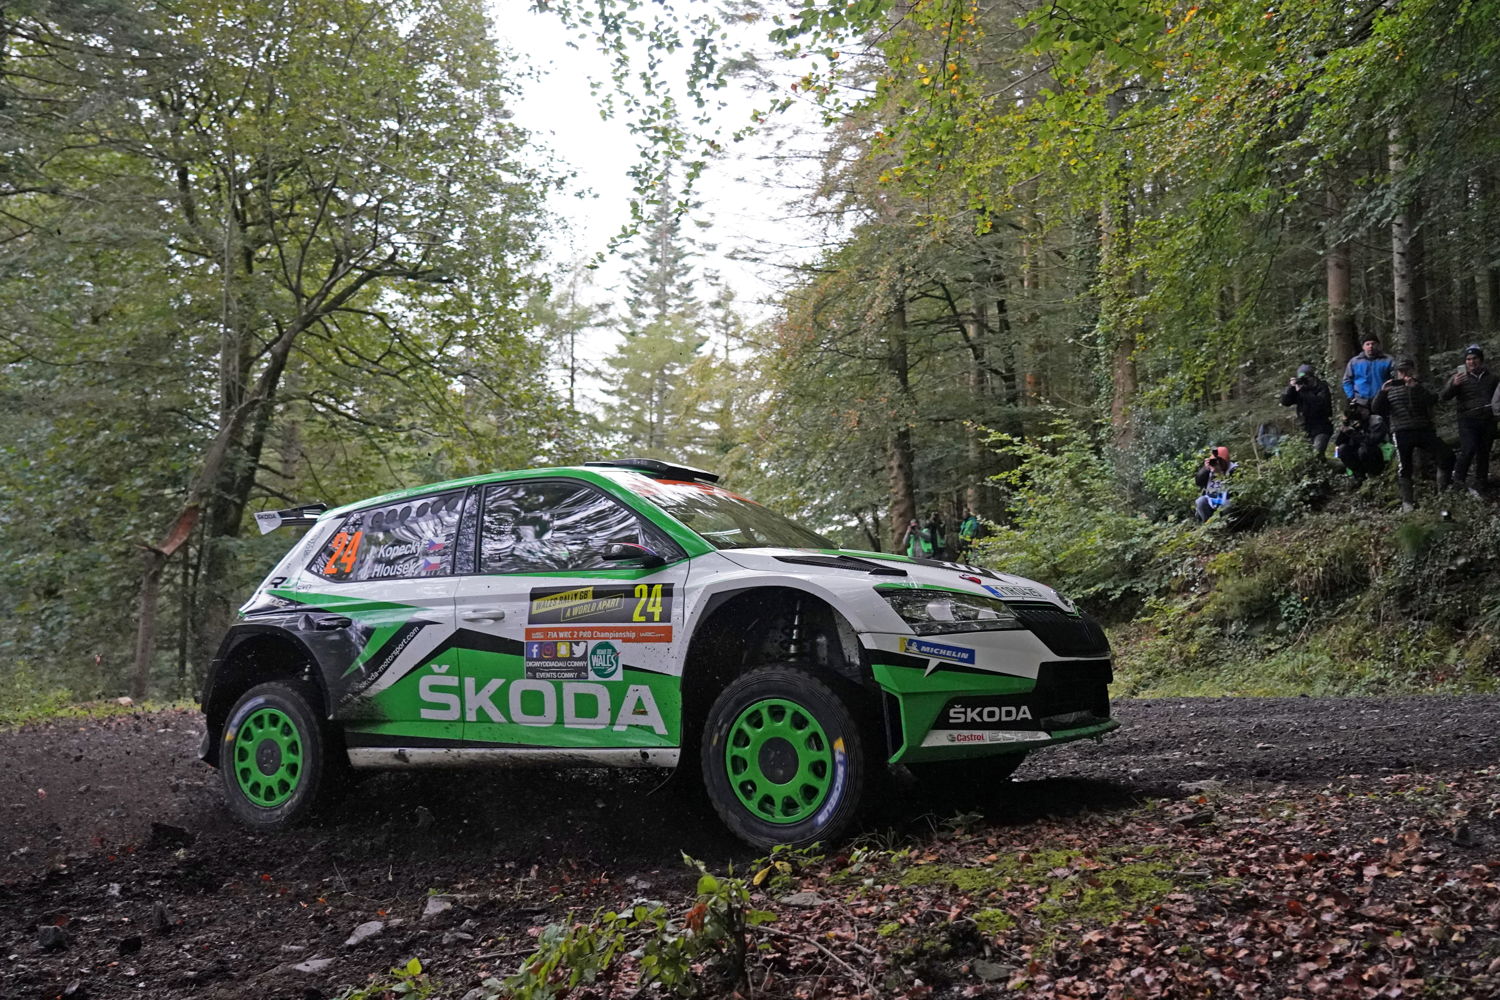 Together with their teammates, Jan Kopecký and co-driver Jan Hloušek (ŠKODA FABIA R5 evo) want to secure the manufacturers' title of the WRC 2 Pro category for ŠKODA Motorsport.